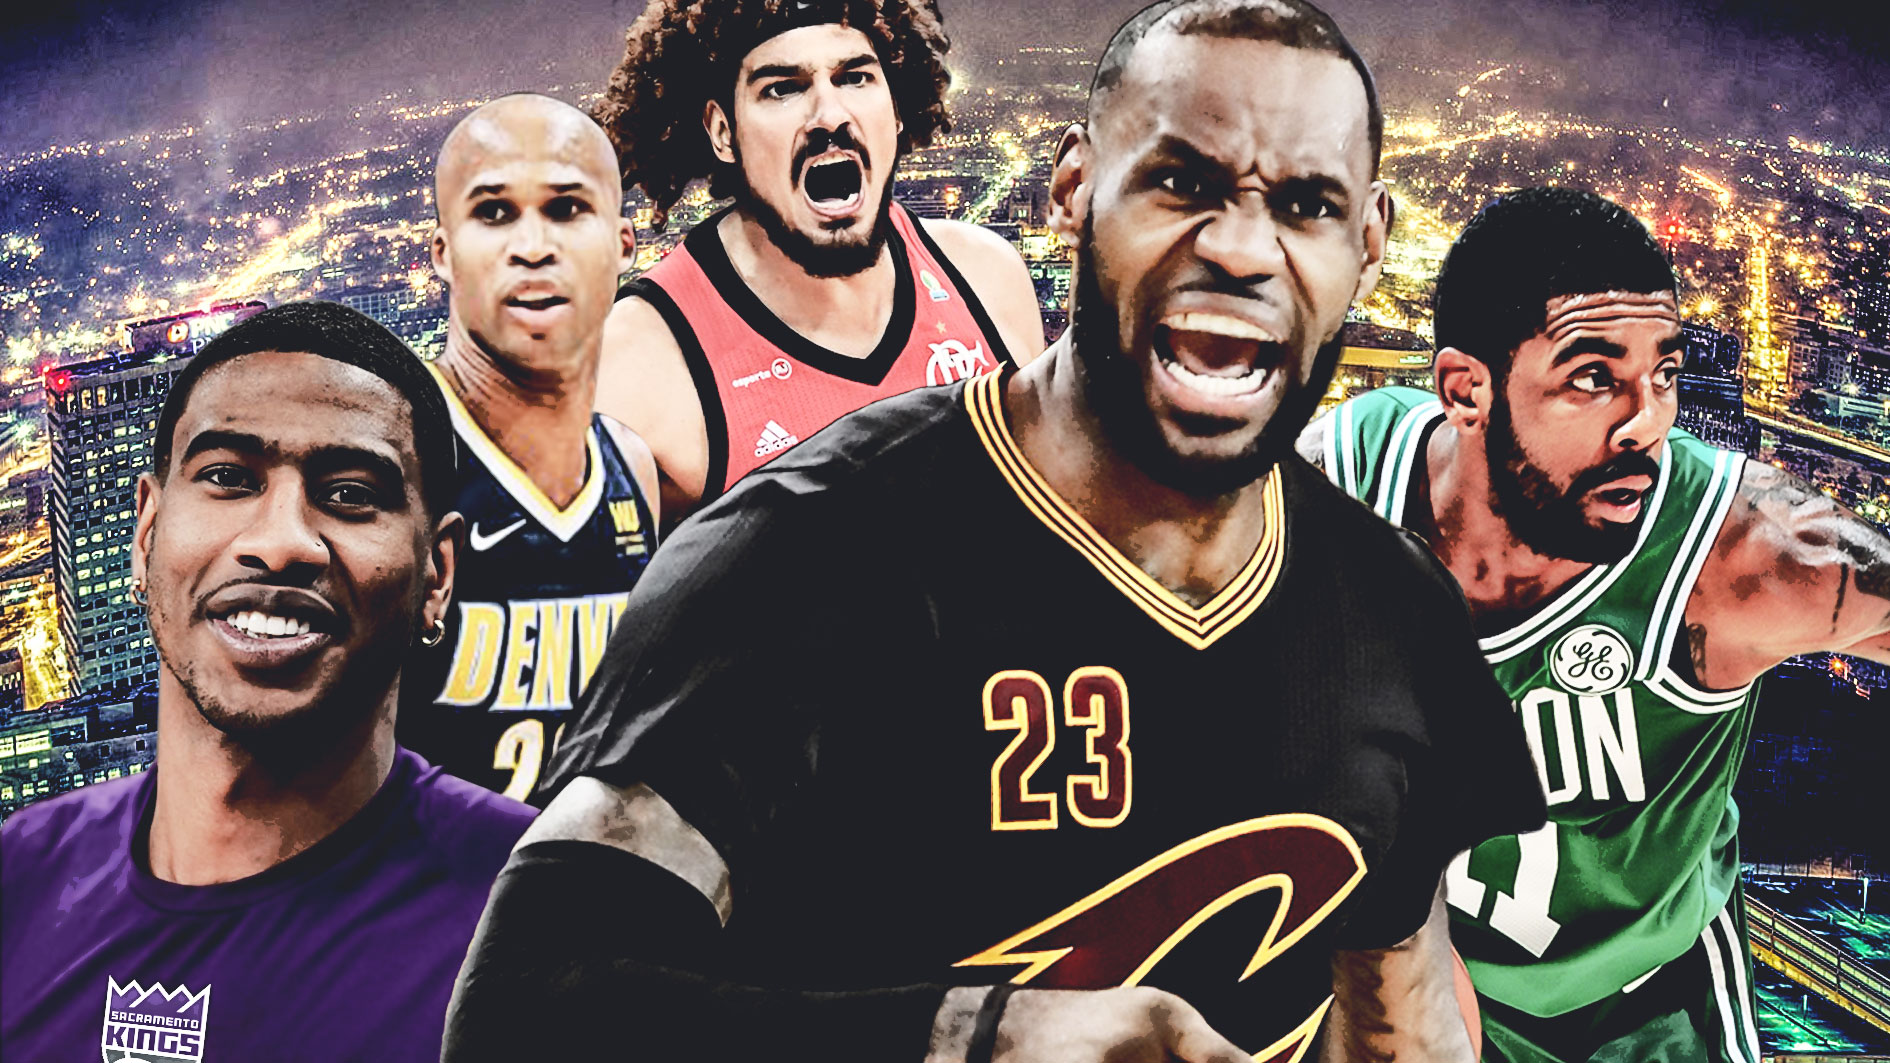 2016 Cleveland Cavaliers: Where Are They Now? - Fadeaway World